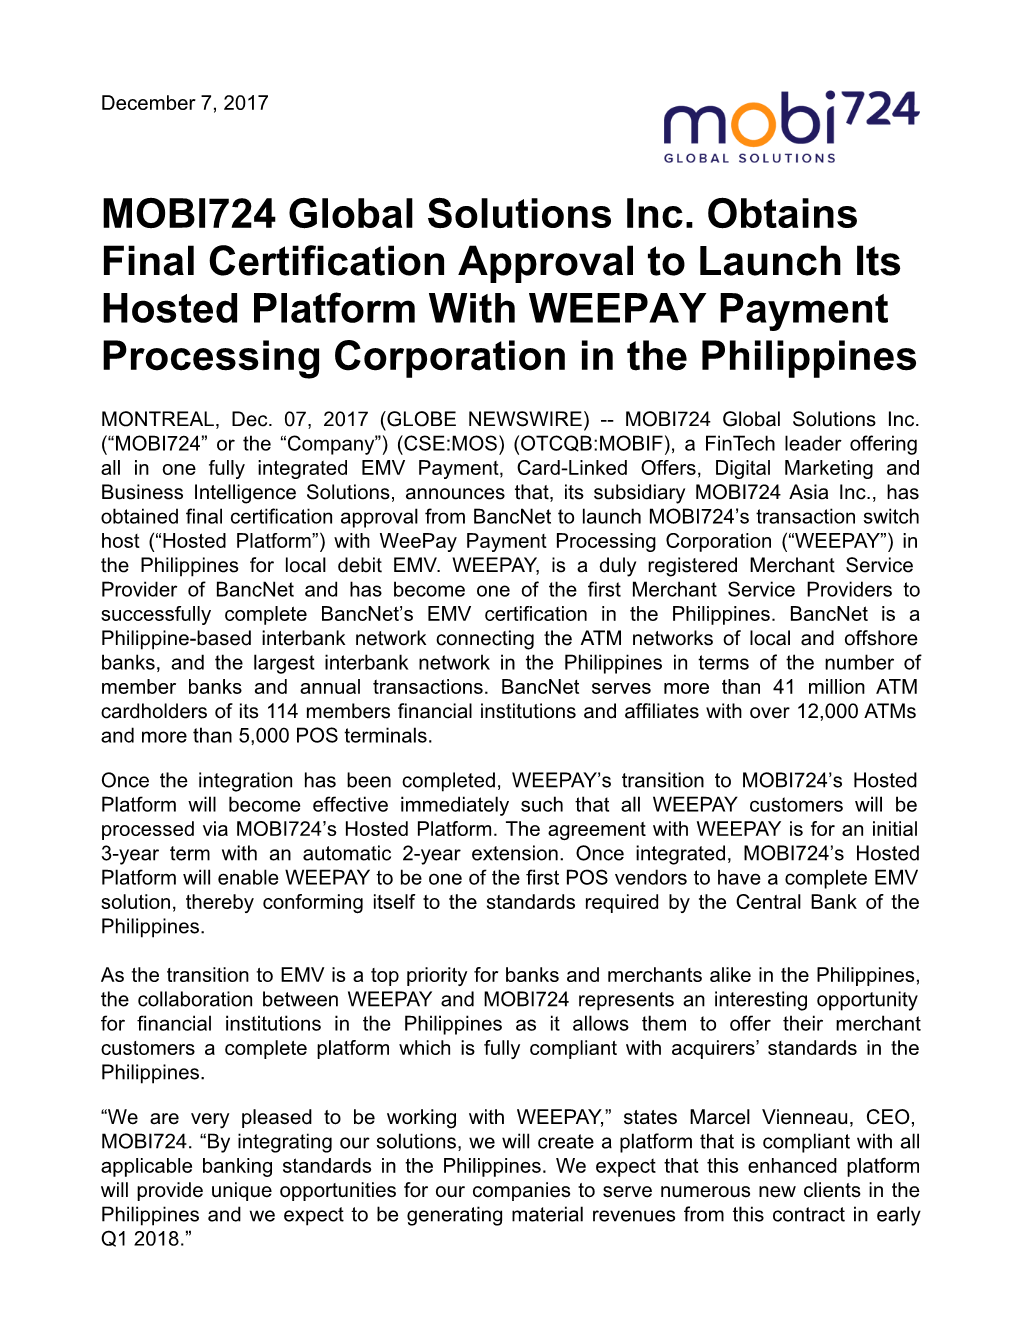 MOBI724 Global Solutions Inc. Obtains Final Certification Approval to Launch Its Hosted Platform with WEEPAY Payment Processing Corporation in the Philippines